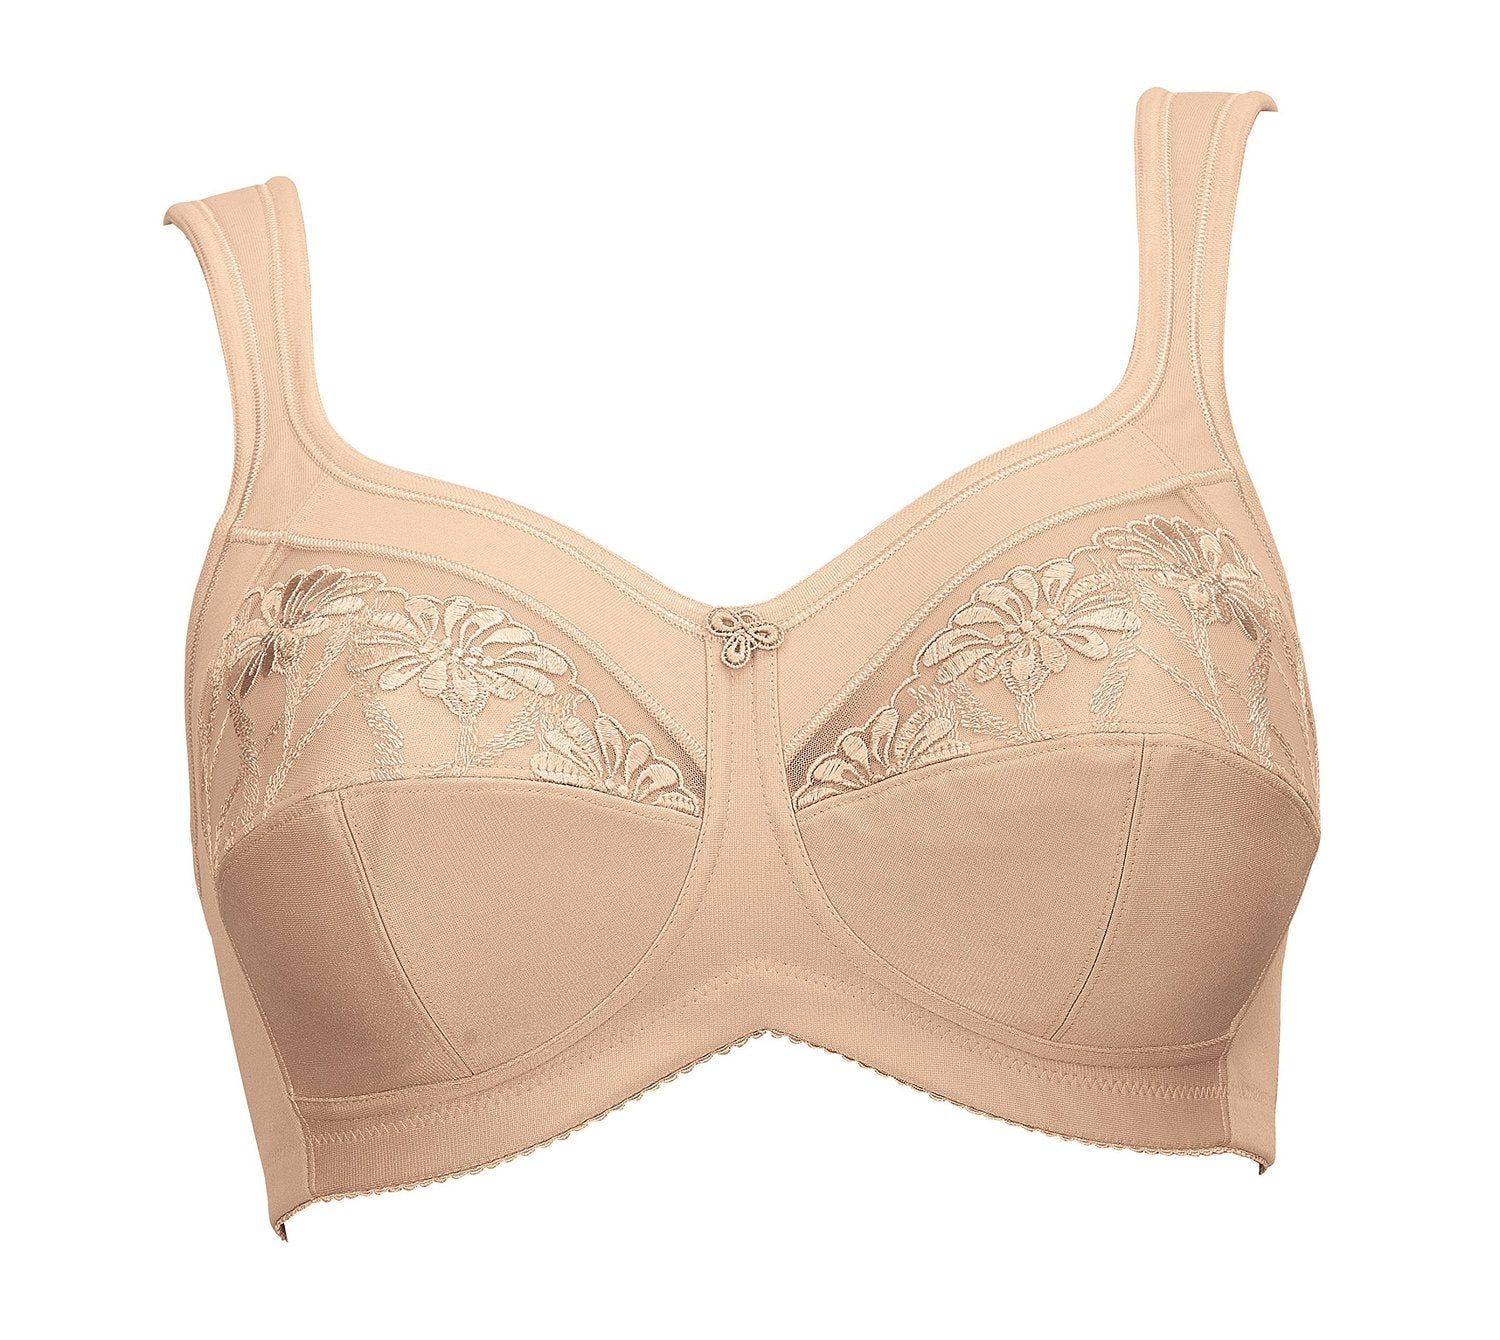 Airway Surgical Mastectomy Bra Style 1460 – Trinity Home Medical Supplies